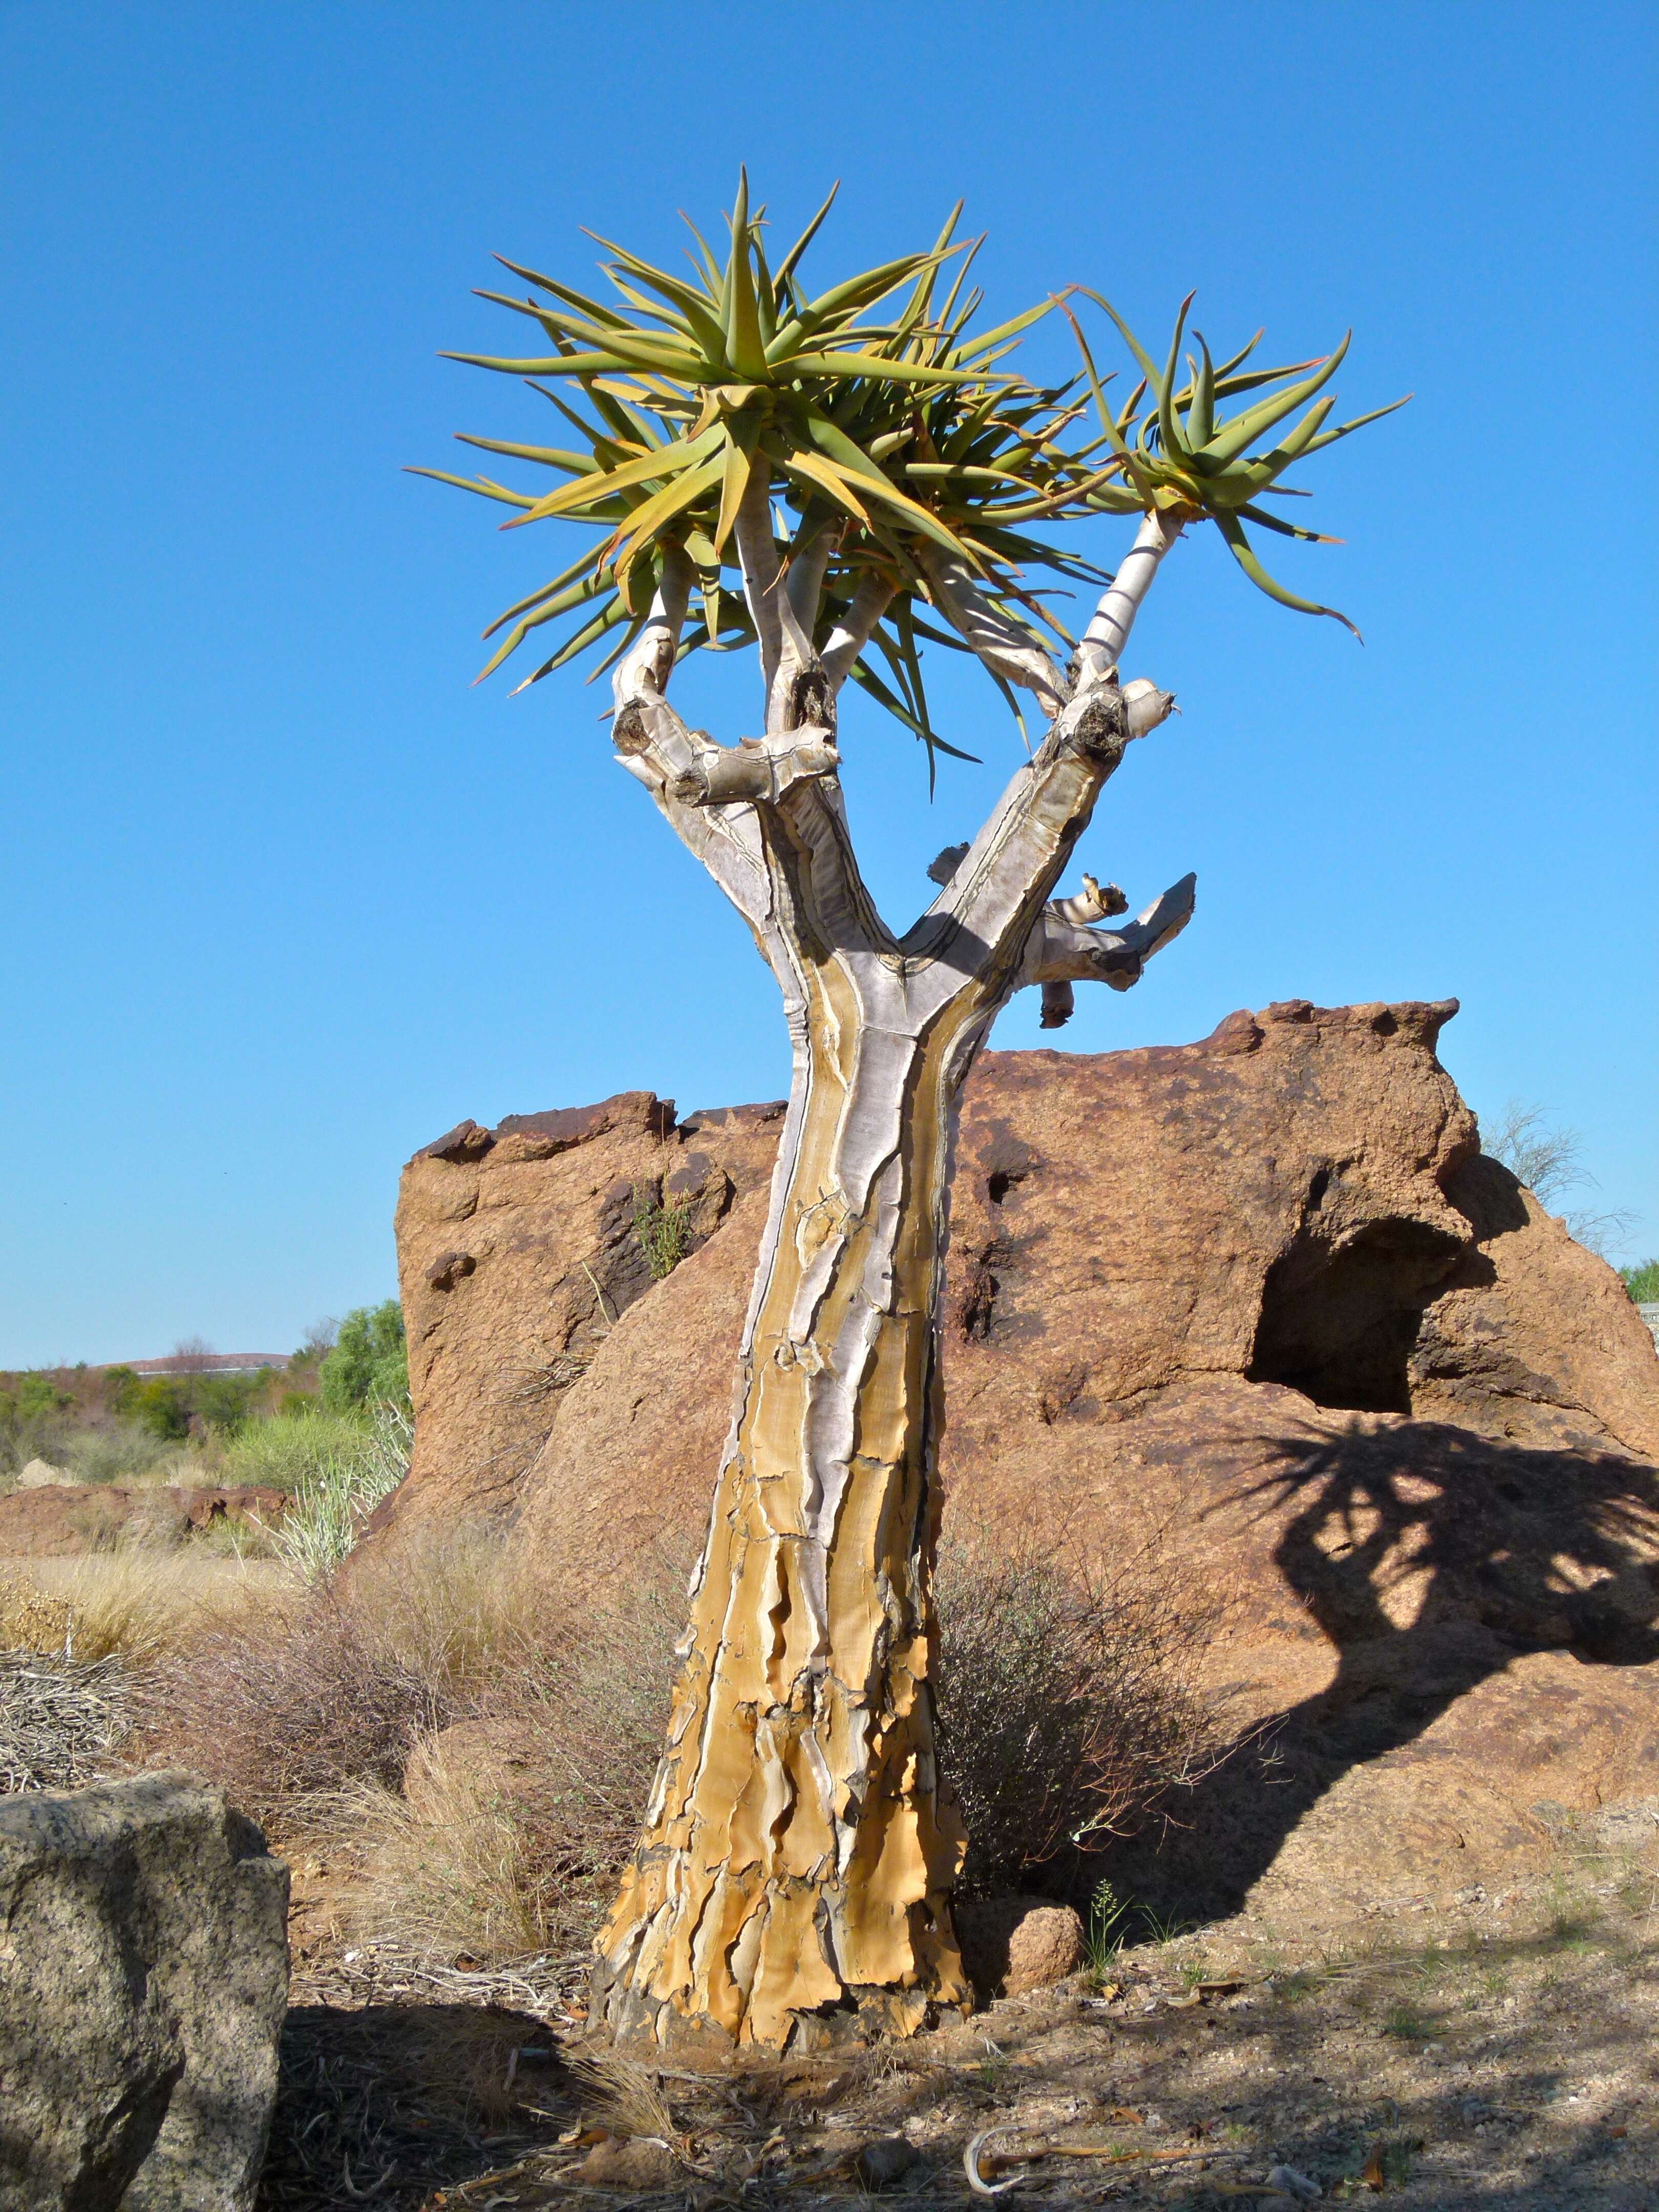 Image of Aloidendron